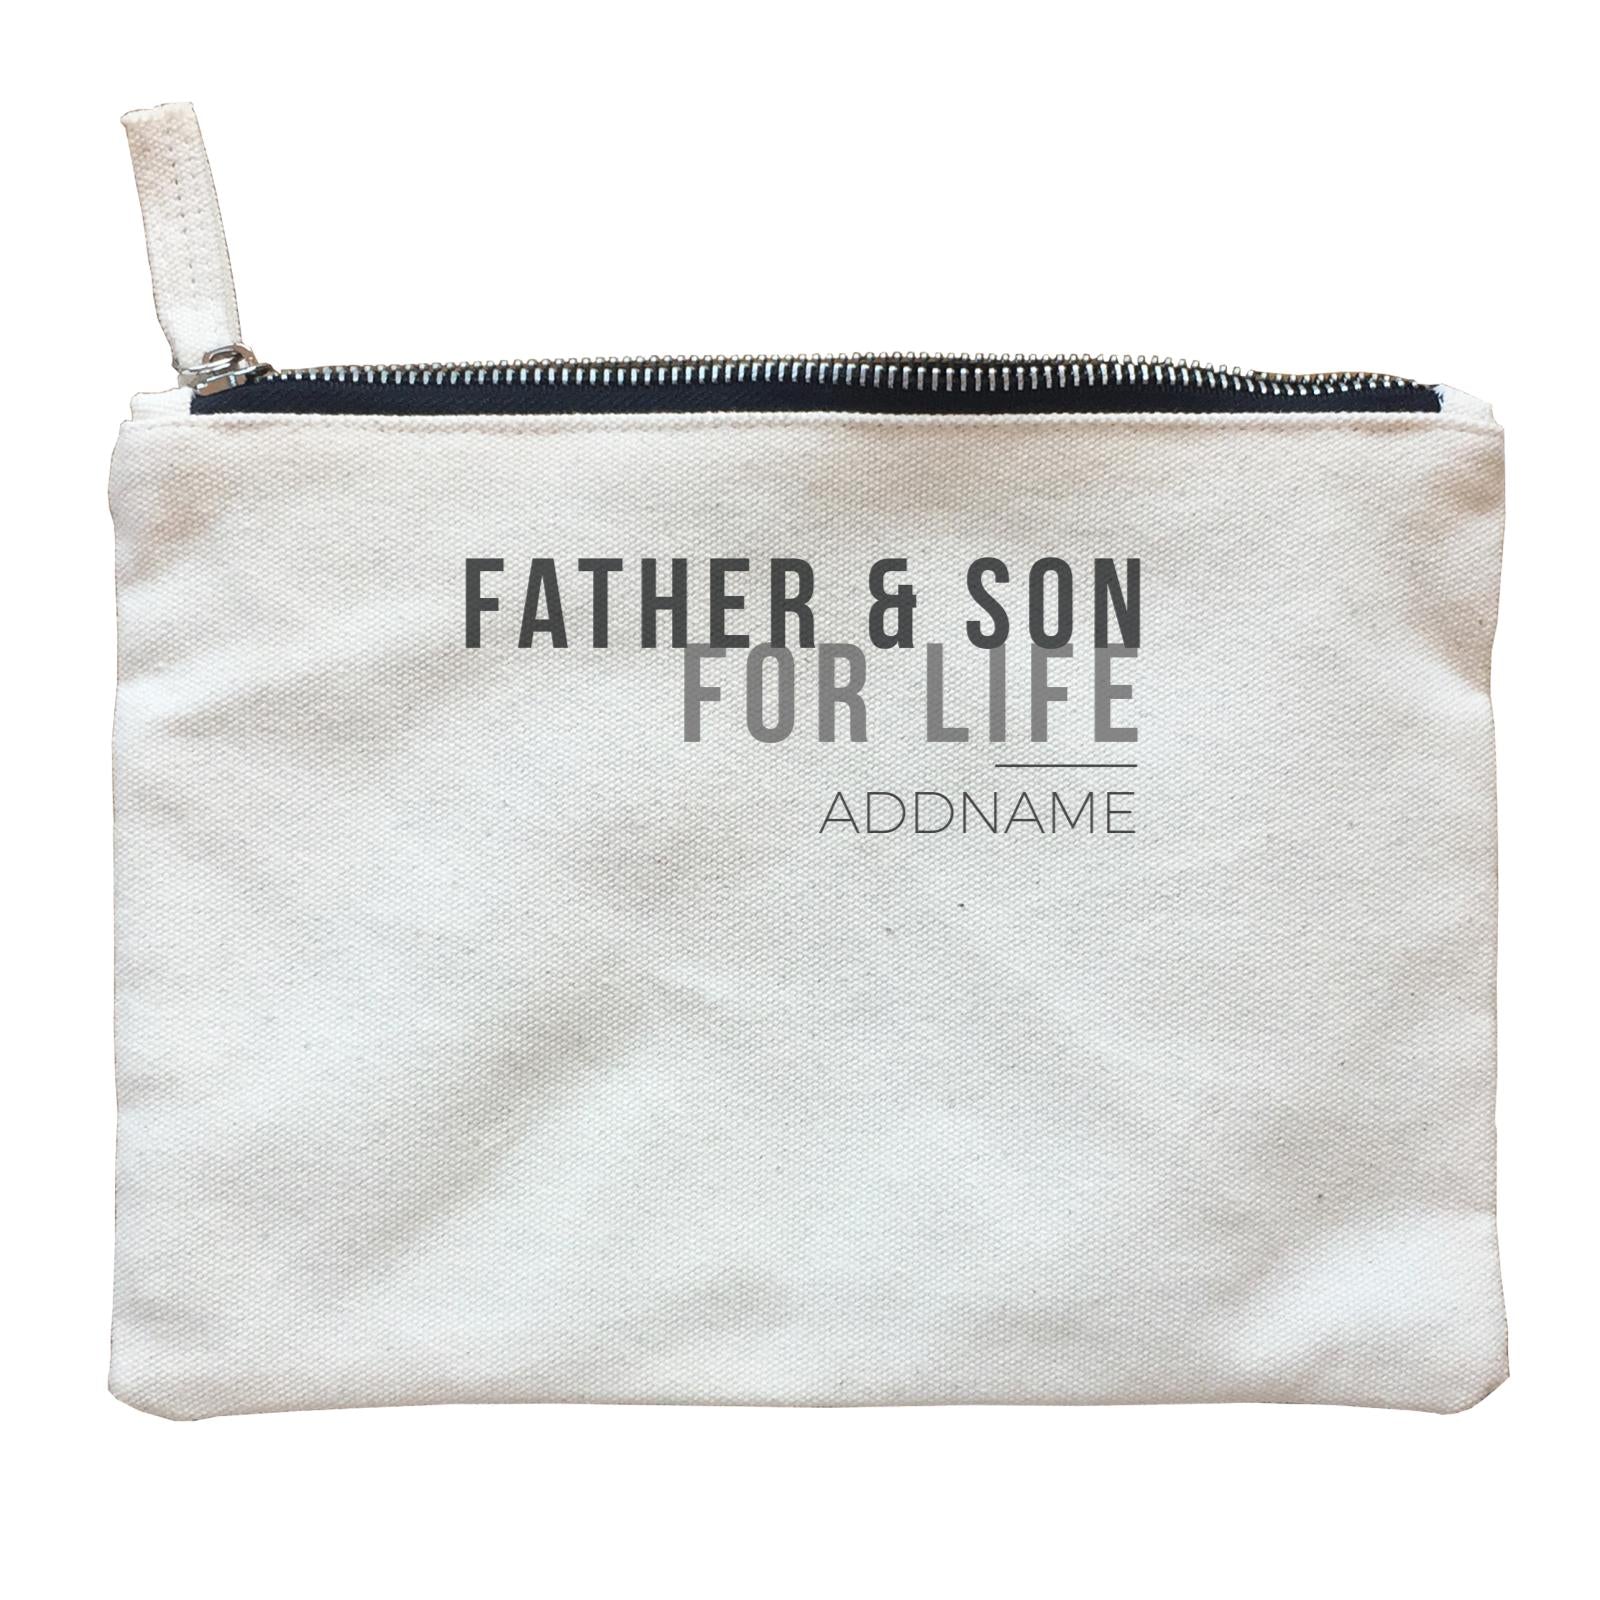 Family For Life Father & Son For Life Addname Zipper Pouch